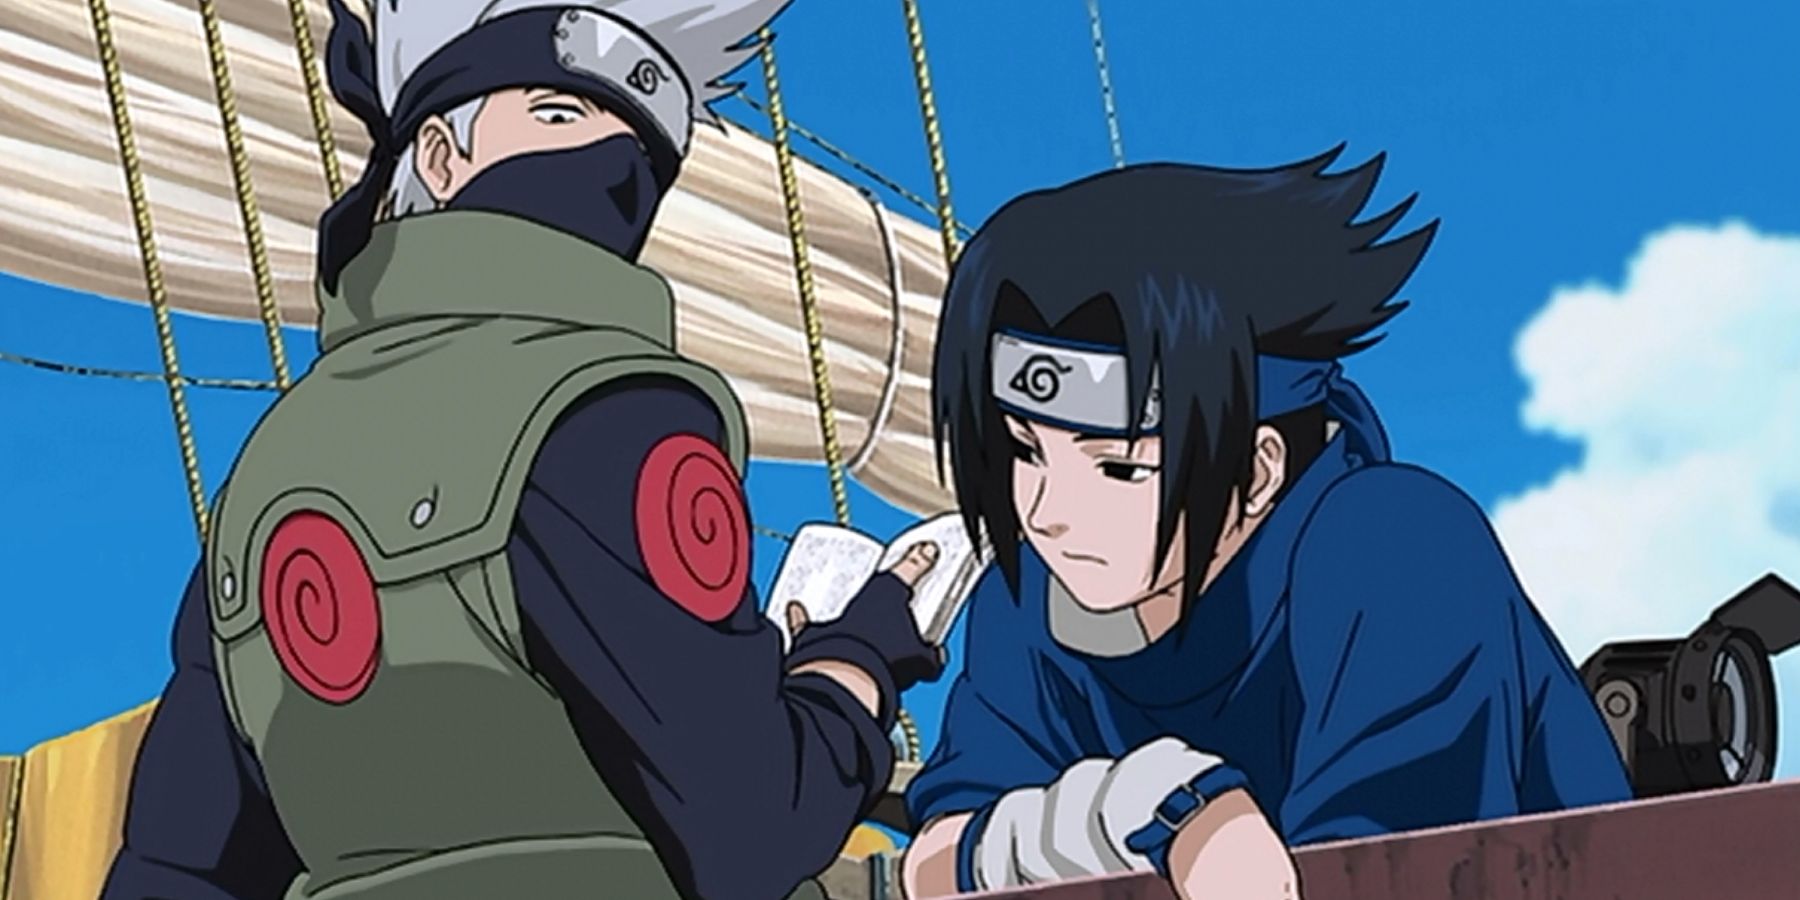 Kakashi holds a book while standing next to Sasuke on a boat in Naruto